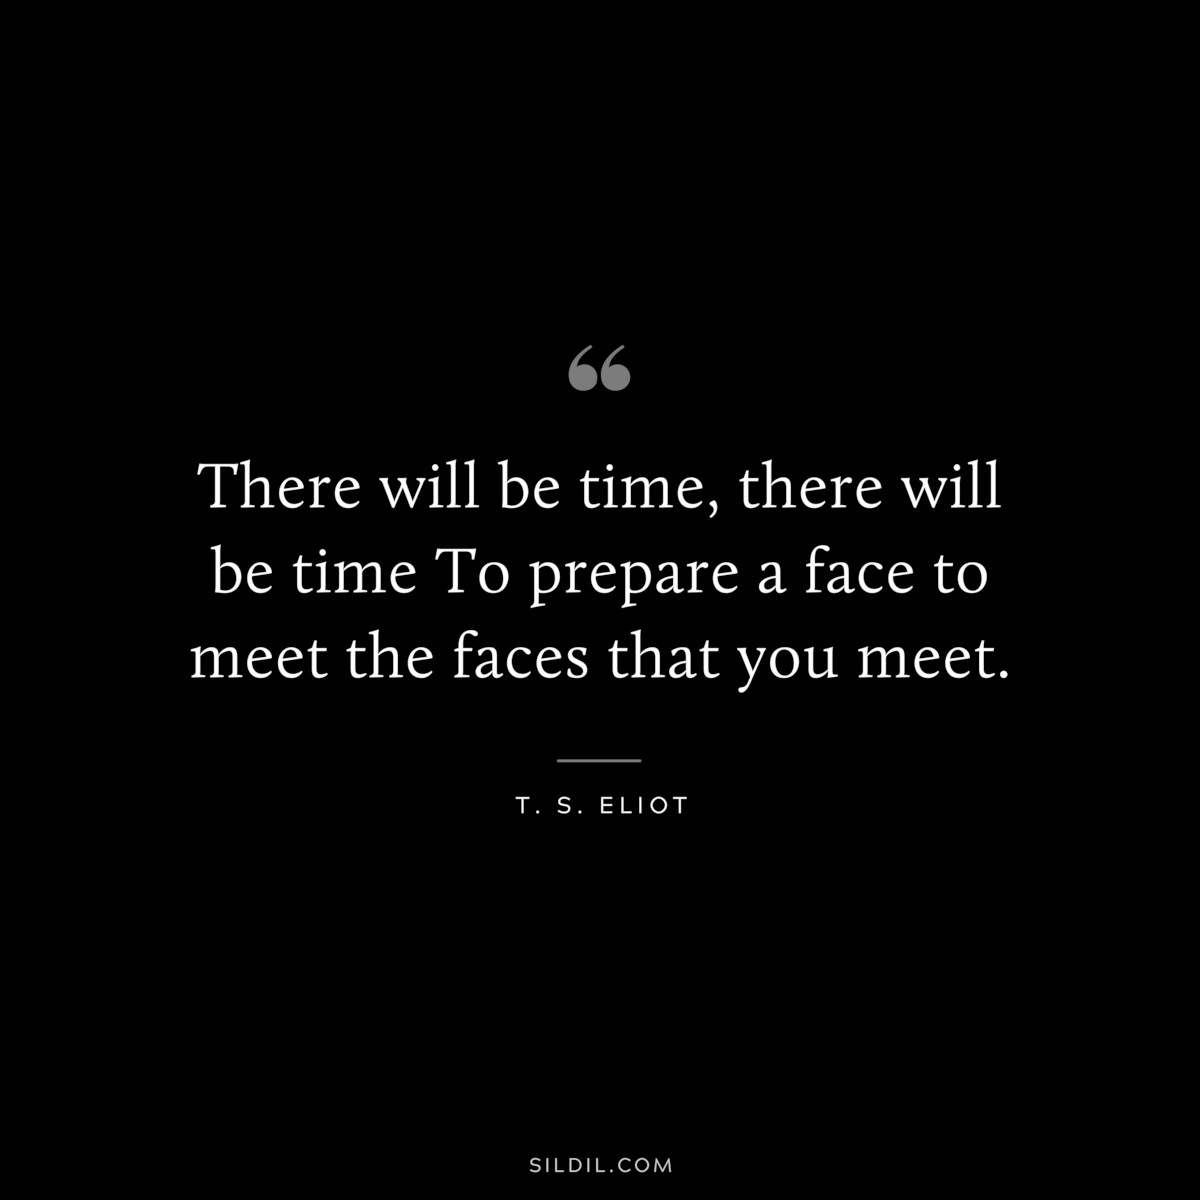 There will be time, there will be time To prepare a face to meet the faces that you meet. ― T. S. Eliot